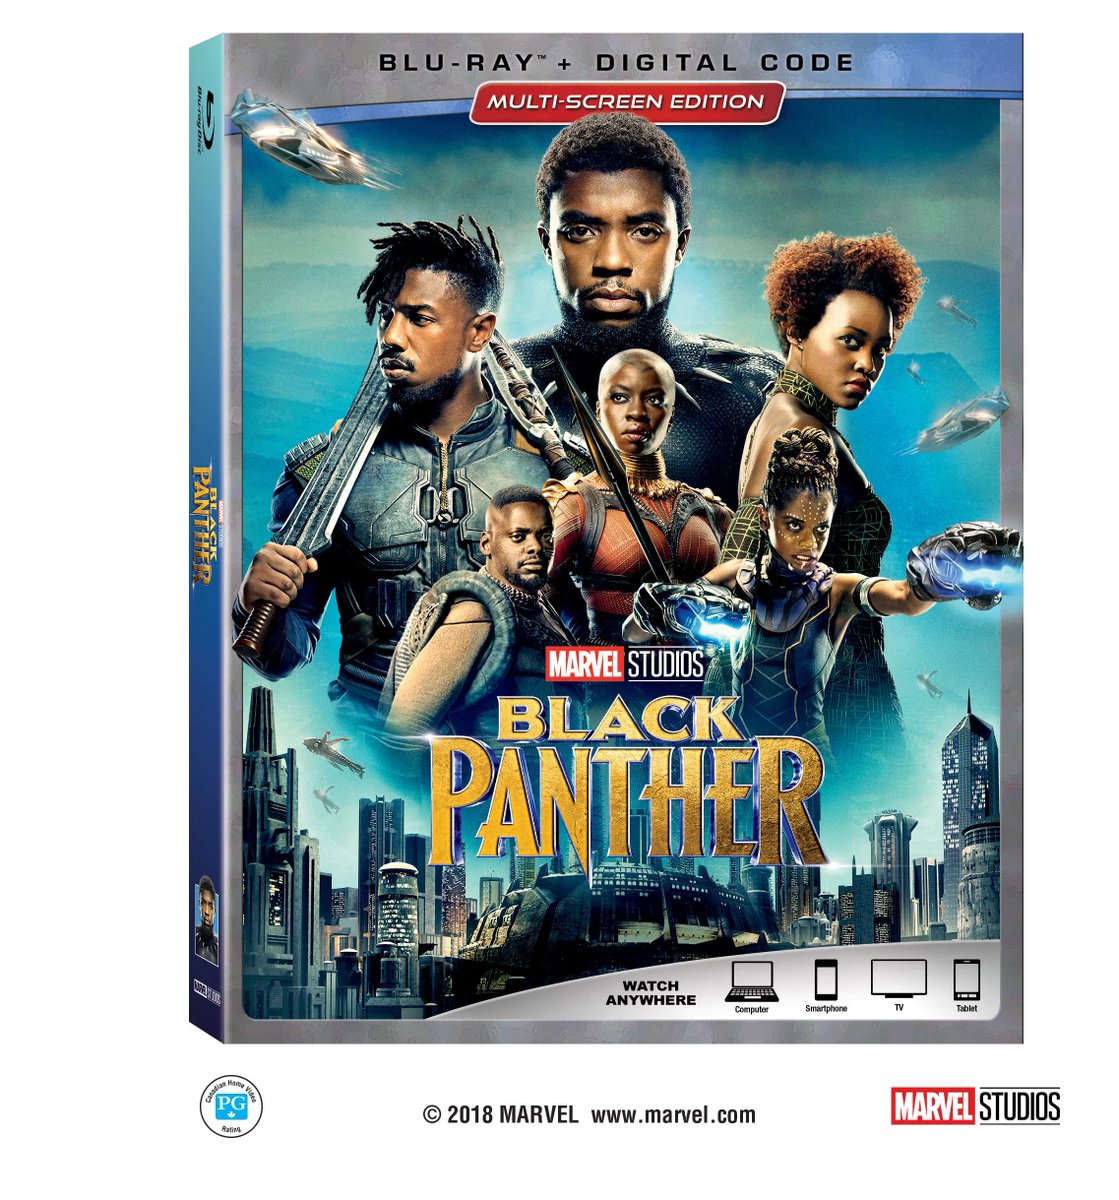 Black Panther Blu-Ray Combo Pack cover (Walt Disney Studios Home Entertainment)